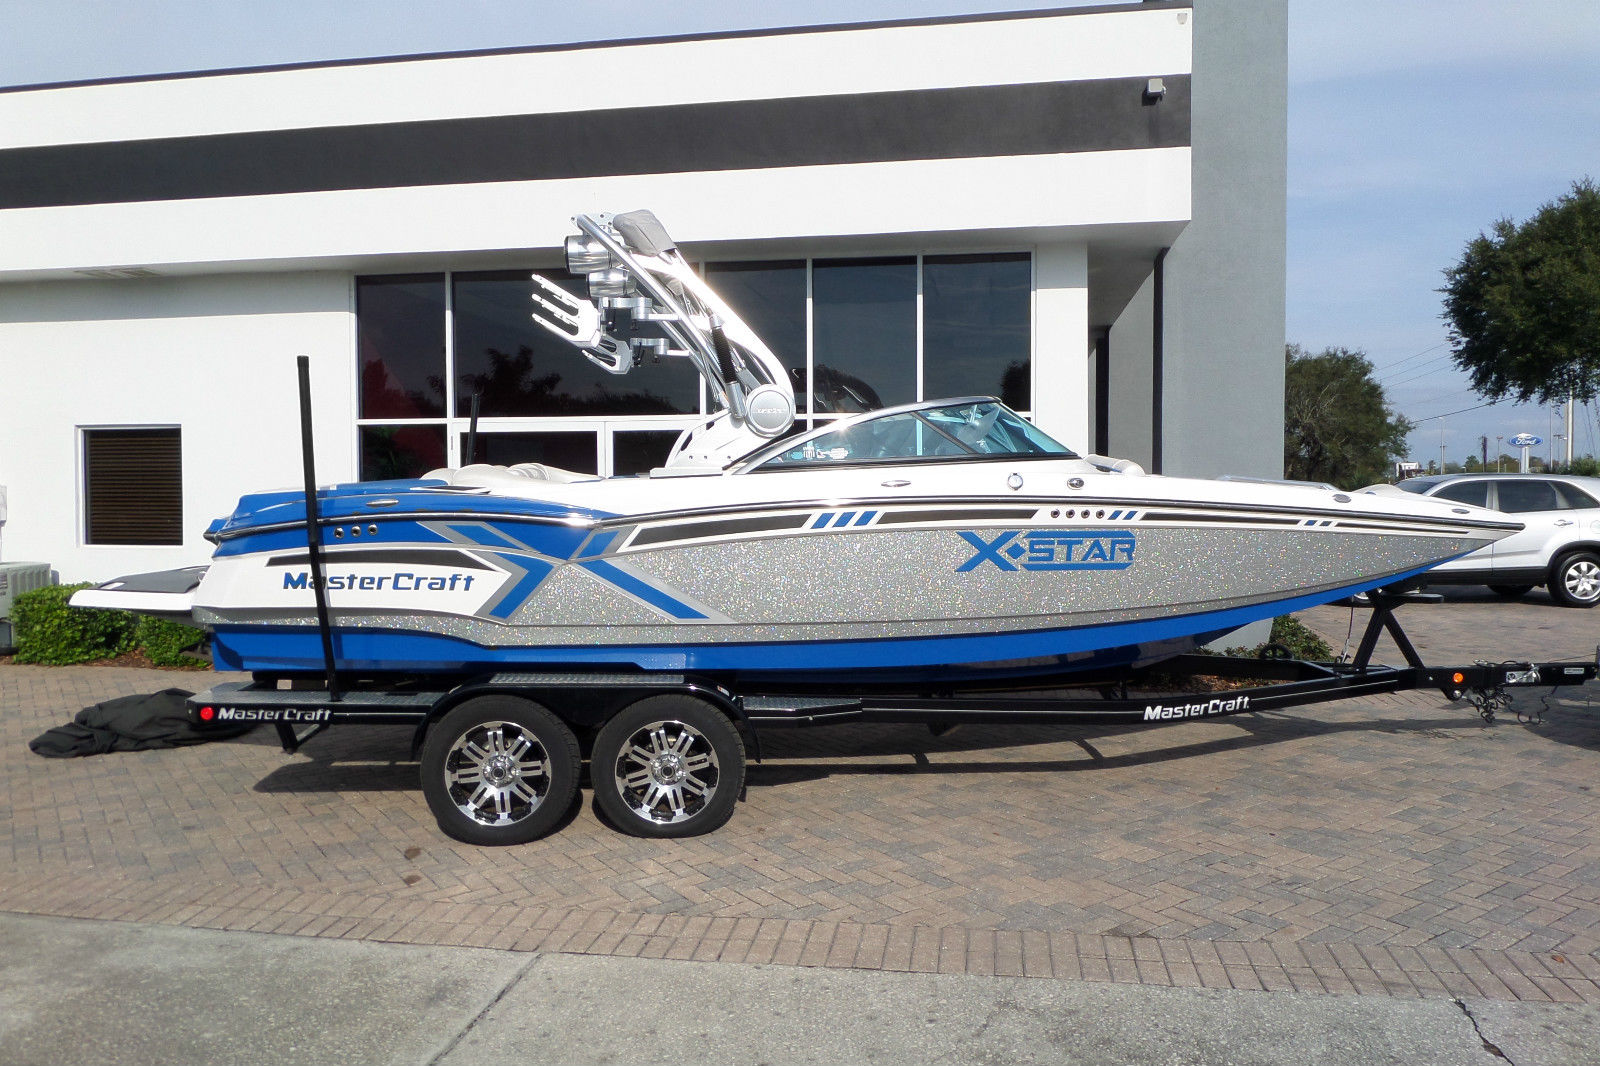 Mastercraft XStar Very Clean Boat! Only 200 Hours With Gen2 Surf System